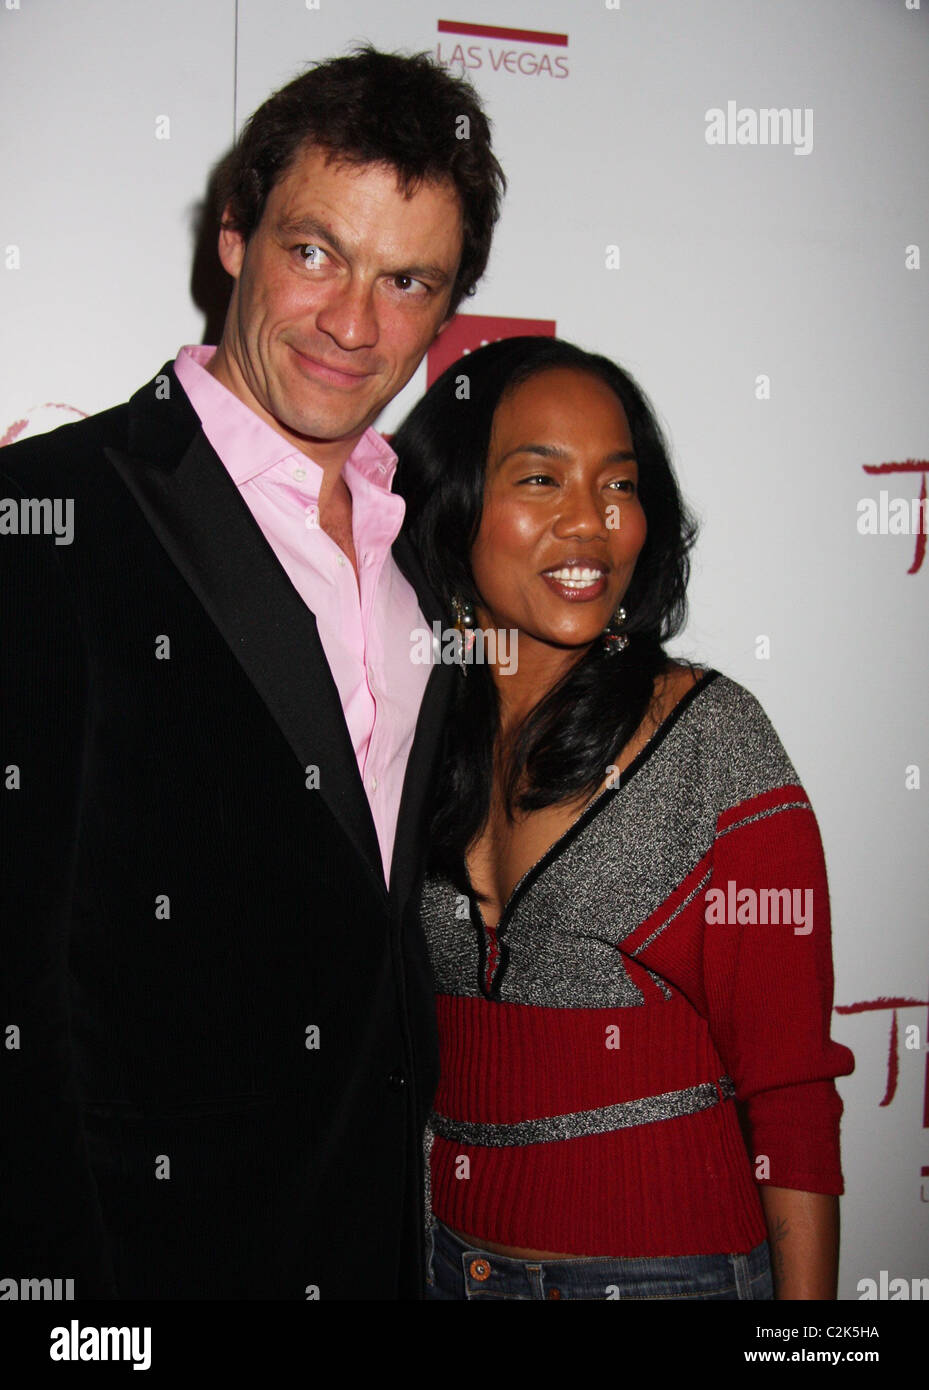 Dominic West and Sonja Sohn Cast Members Of HBO's 'The Wire' celebrate the  Season Finale at TAO Nightclub Las Vegas, Nevada Stock Photo - Alamy